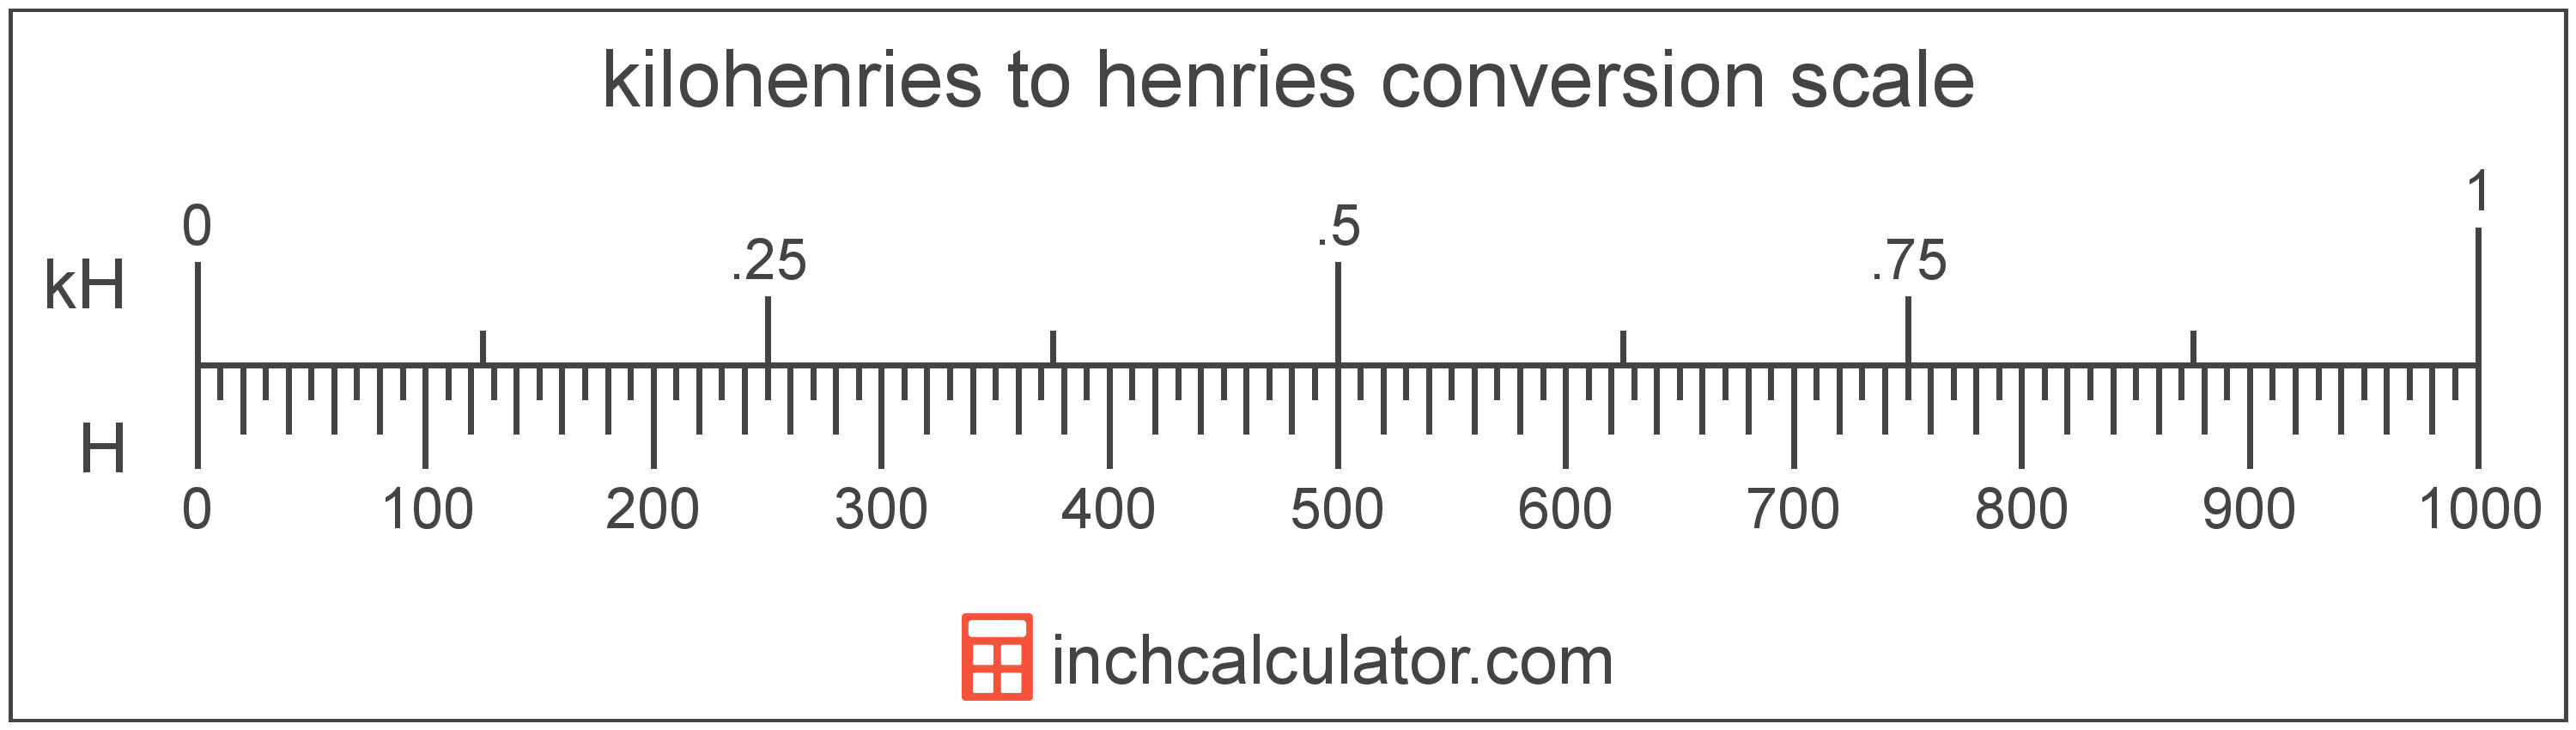 conversion scale showing kilohenries and equivalent henries electrical inductance values